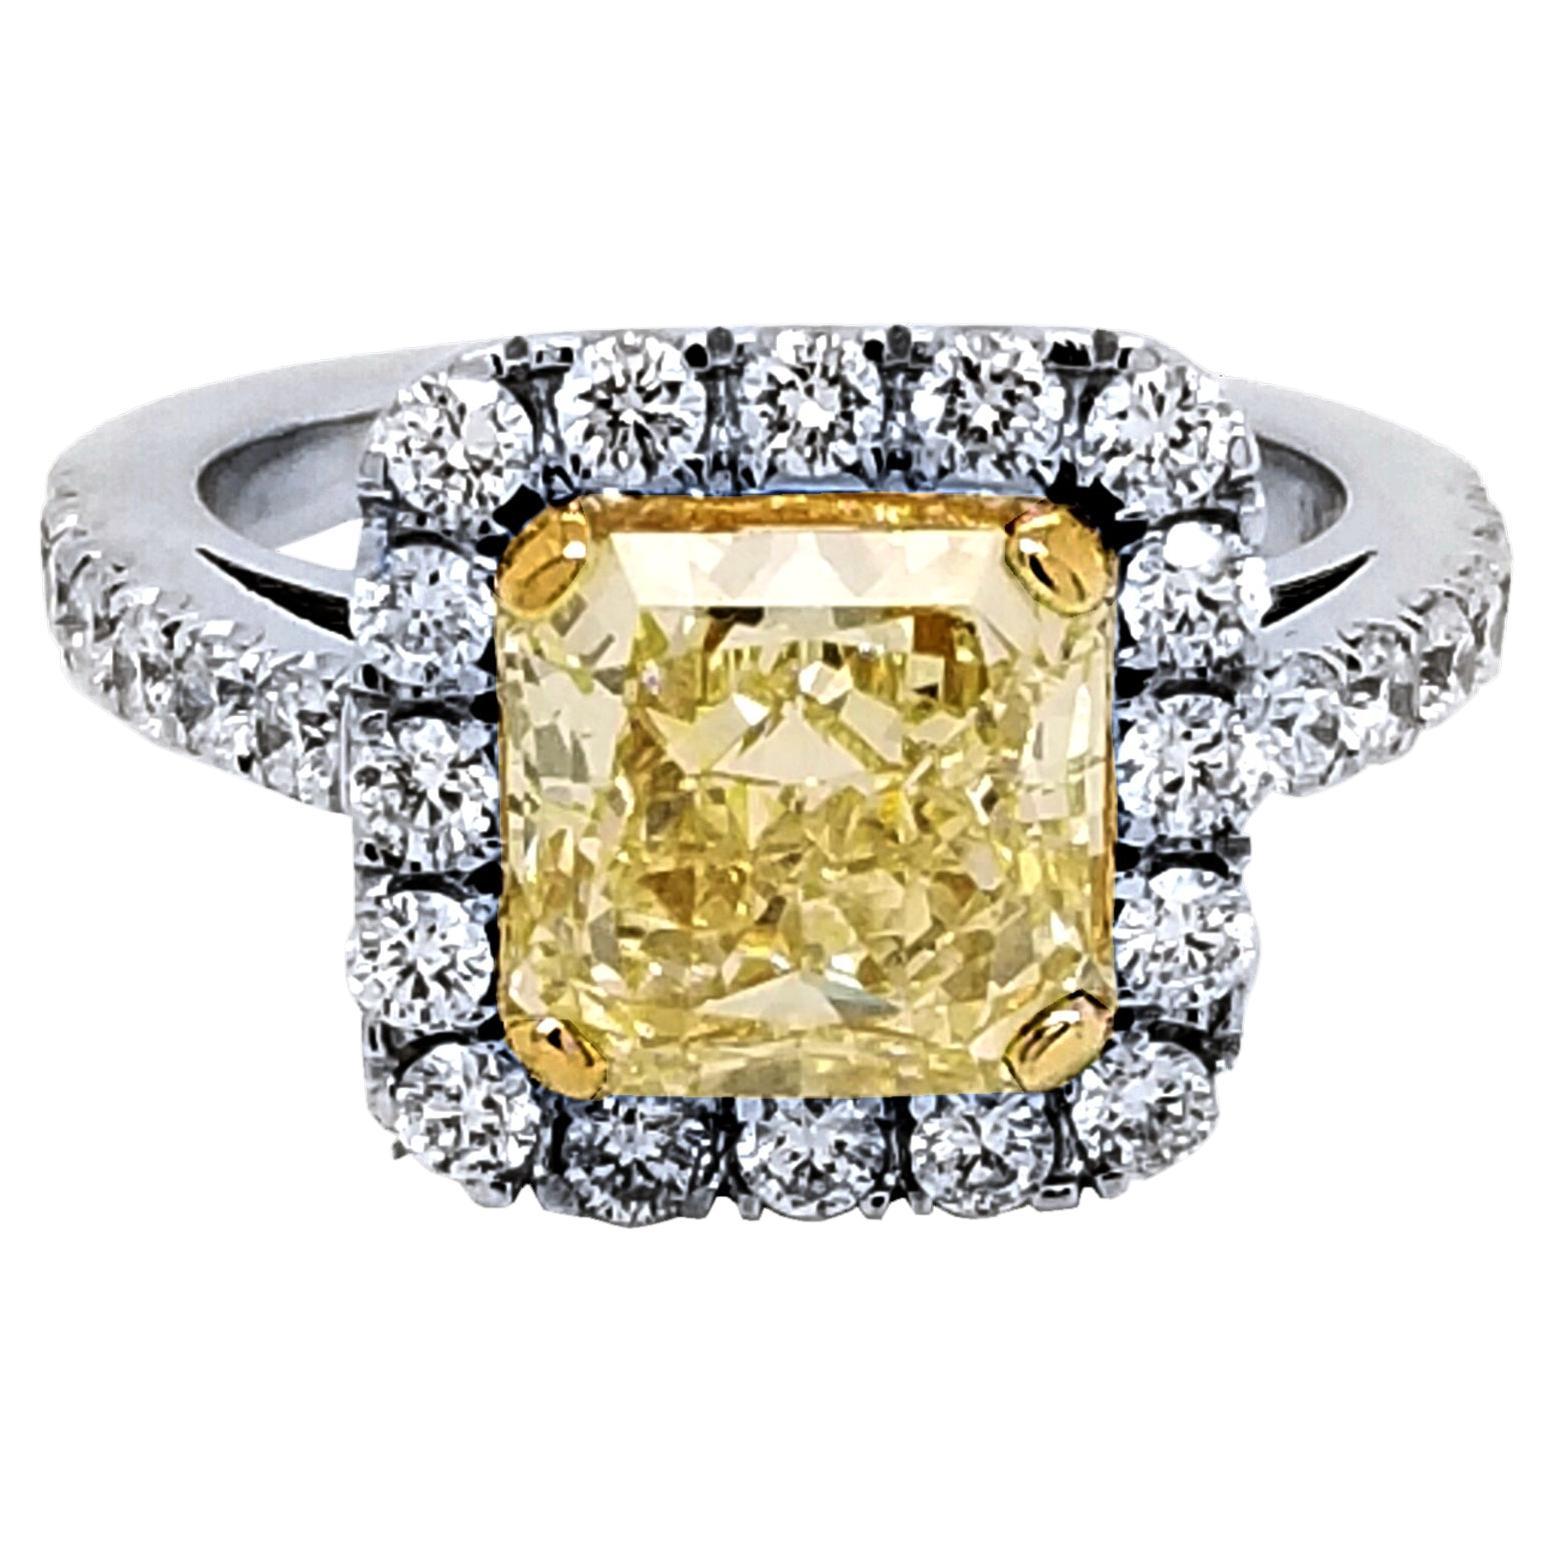 EGL 2.49 Ct Fancy Light Yellow Radiant Pave Set 18K Engagement Ring with Halo